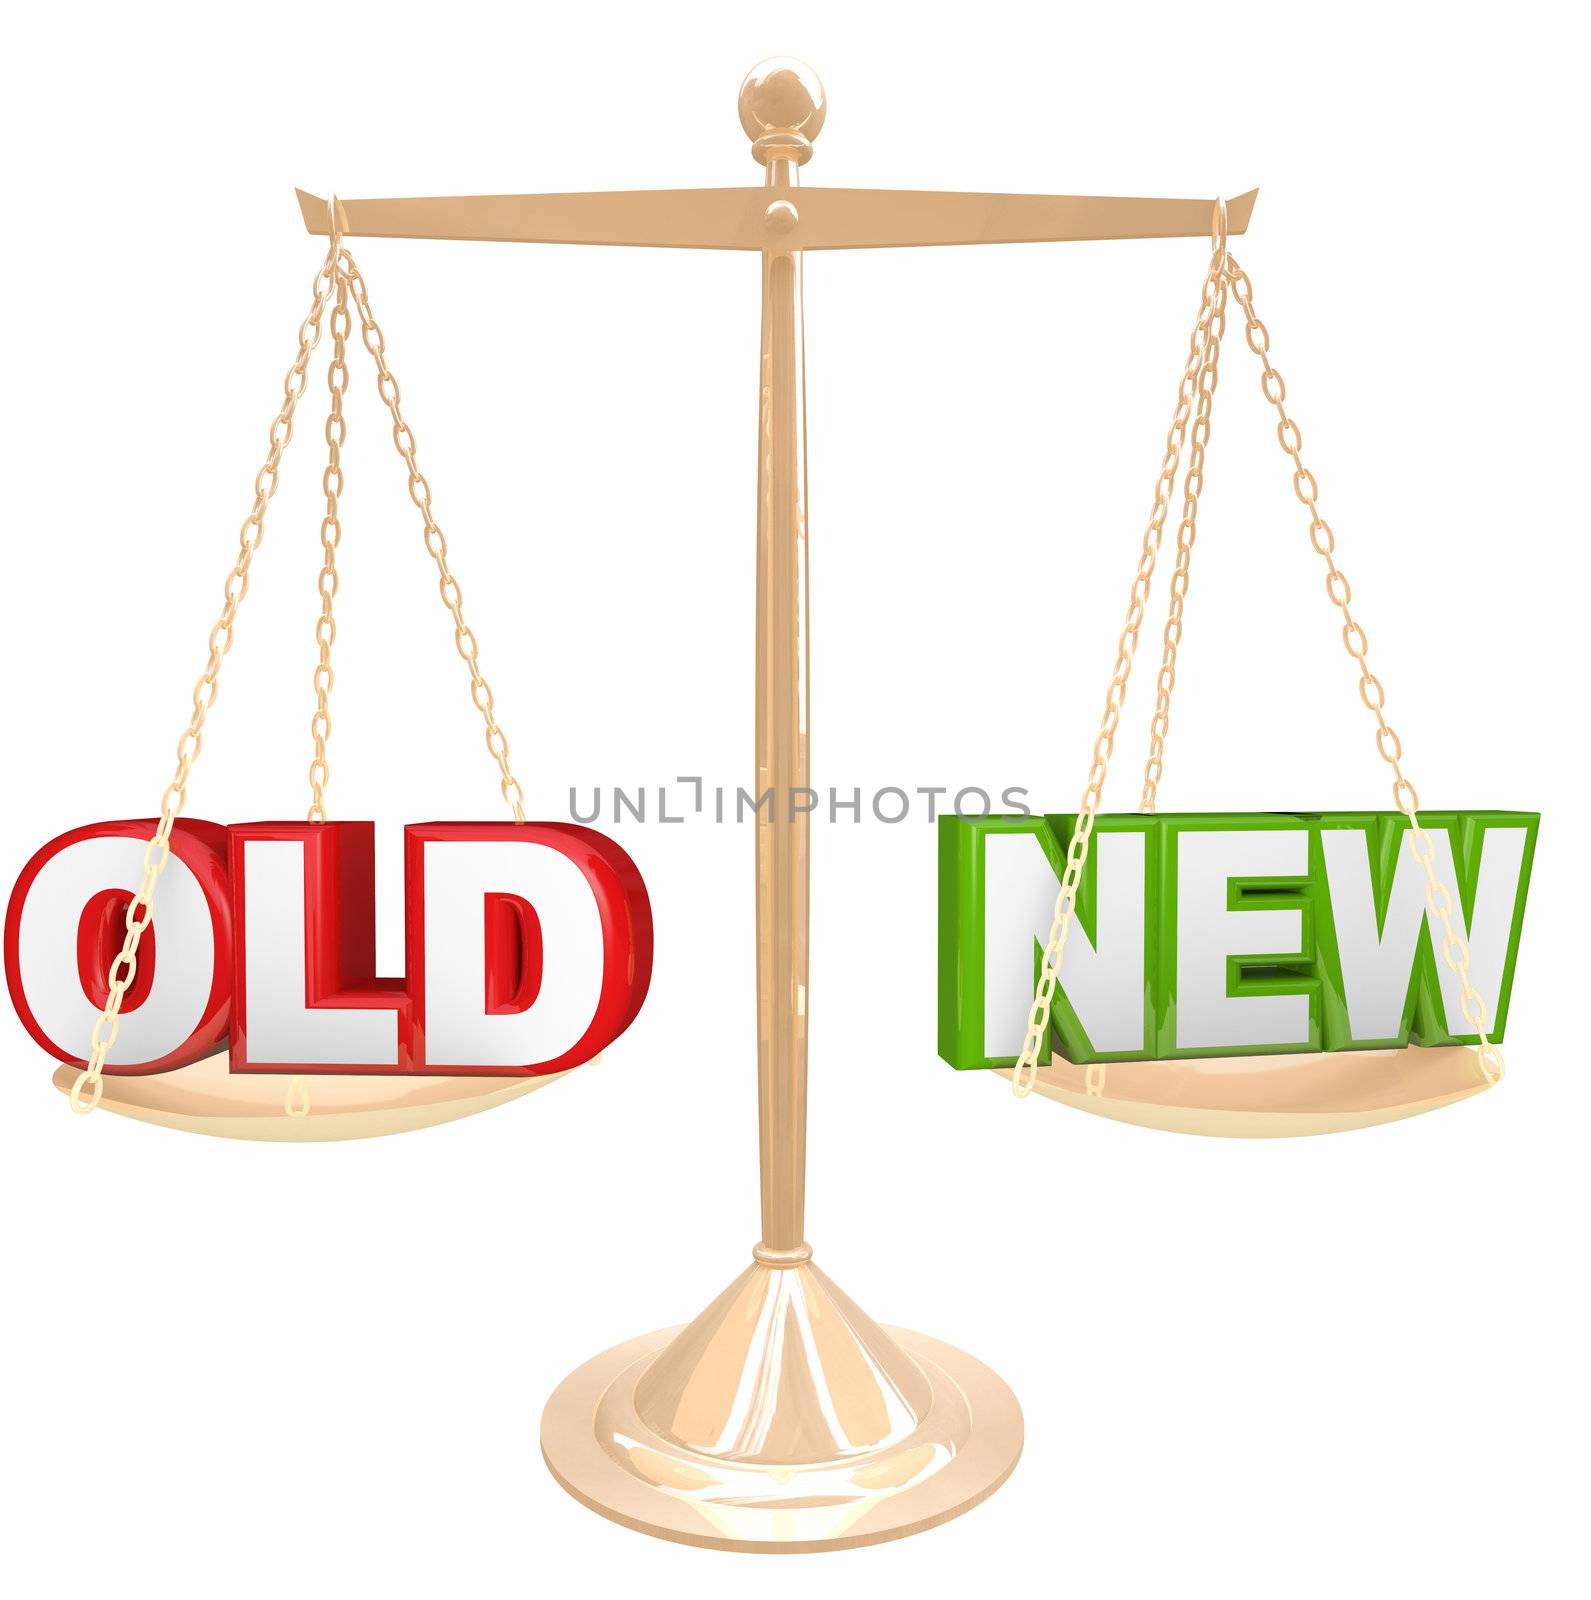 Old Vs New Words on Balance Scale Weighing Comparison by iQoncept